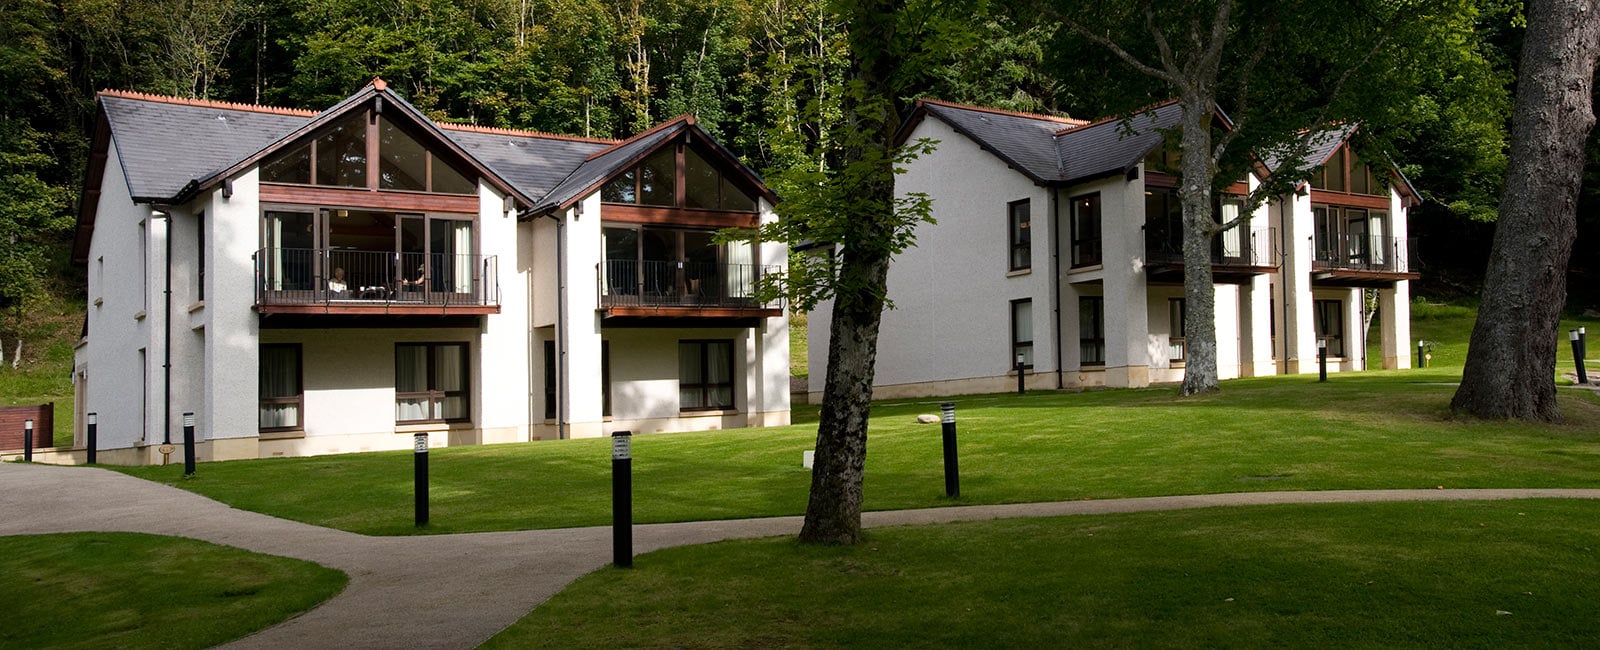 Exterior of Dunkeld House Lodges, Managed by Hilton Grand Vacations in Perthshire, Scotland